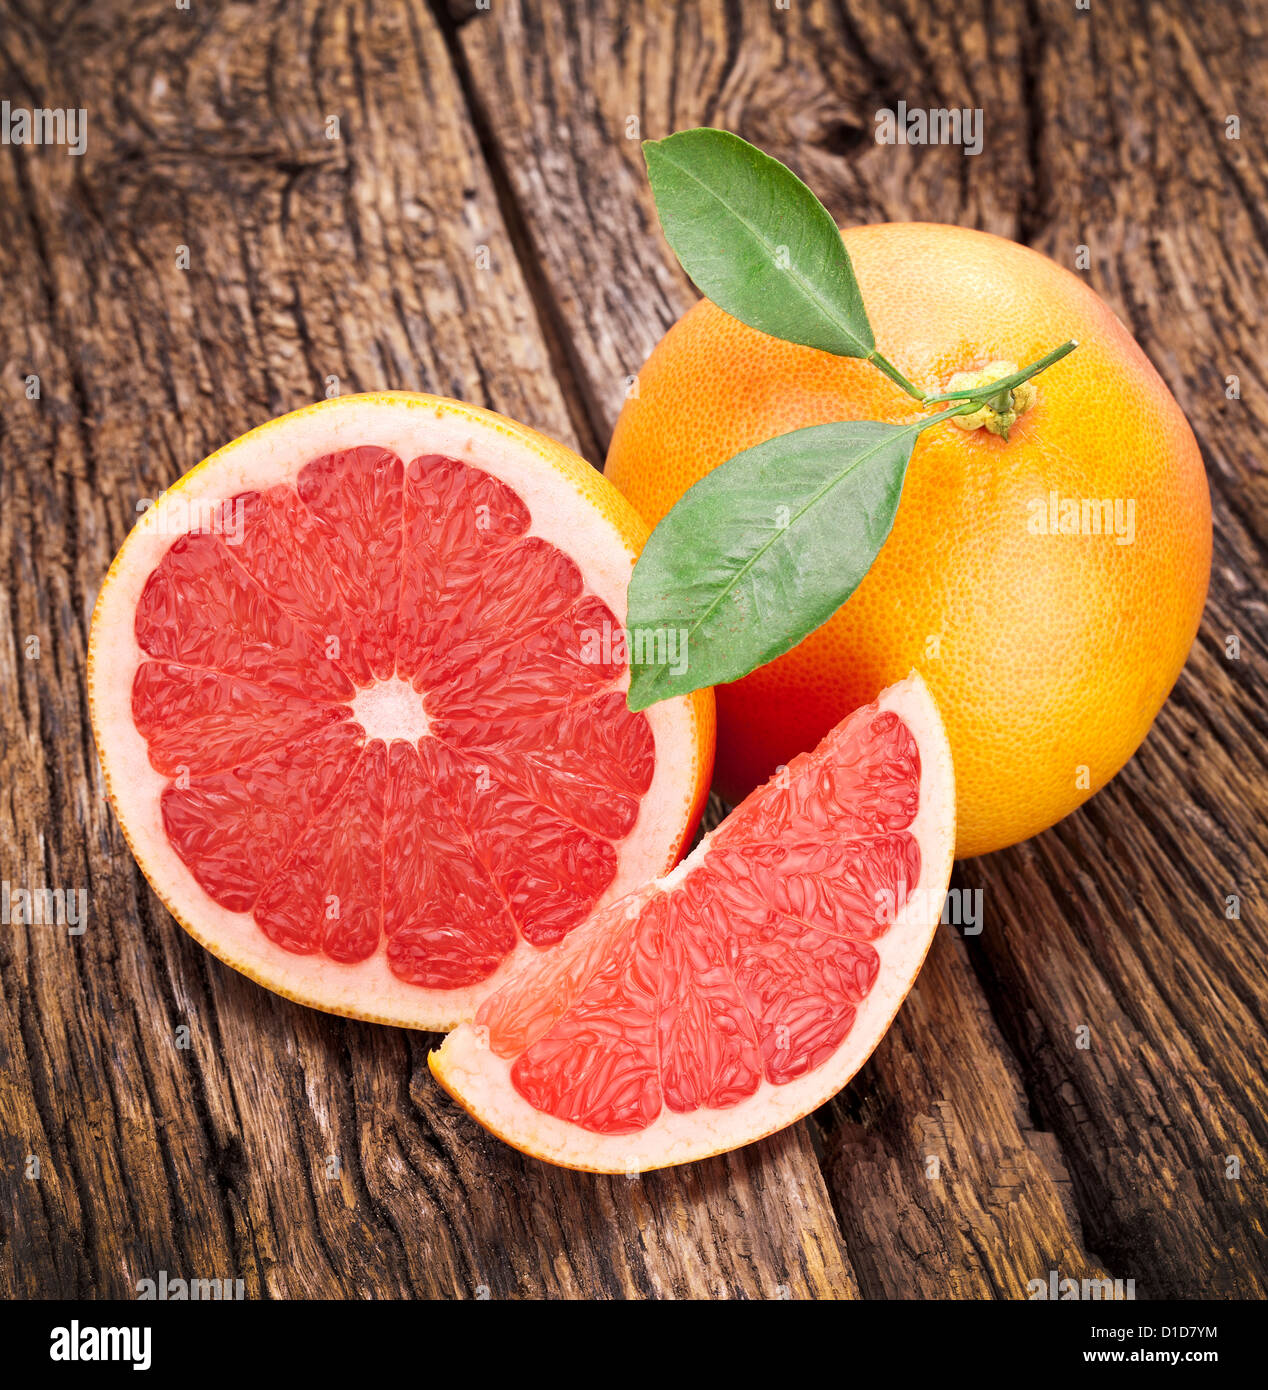 Grapefruit with slices on a wooden table. Stock Photo